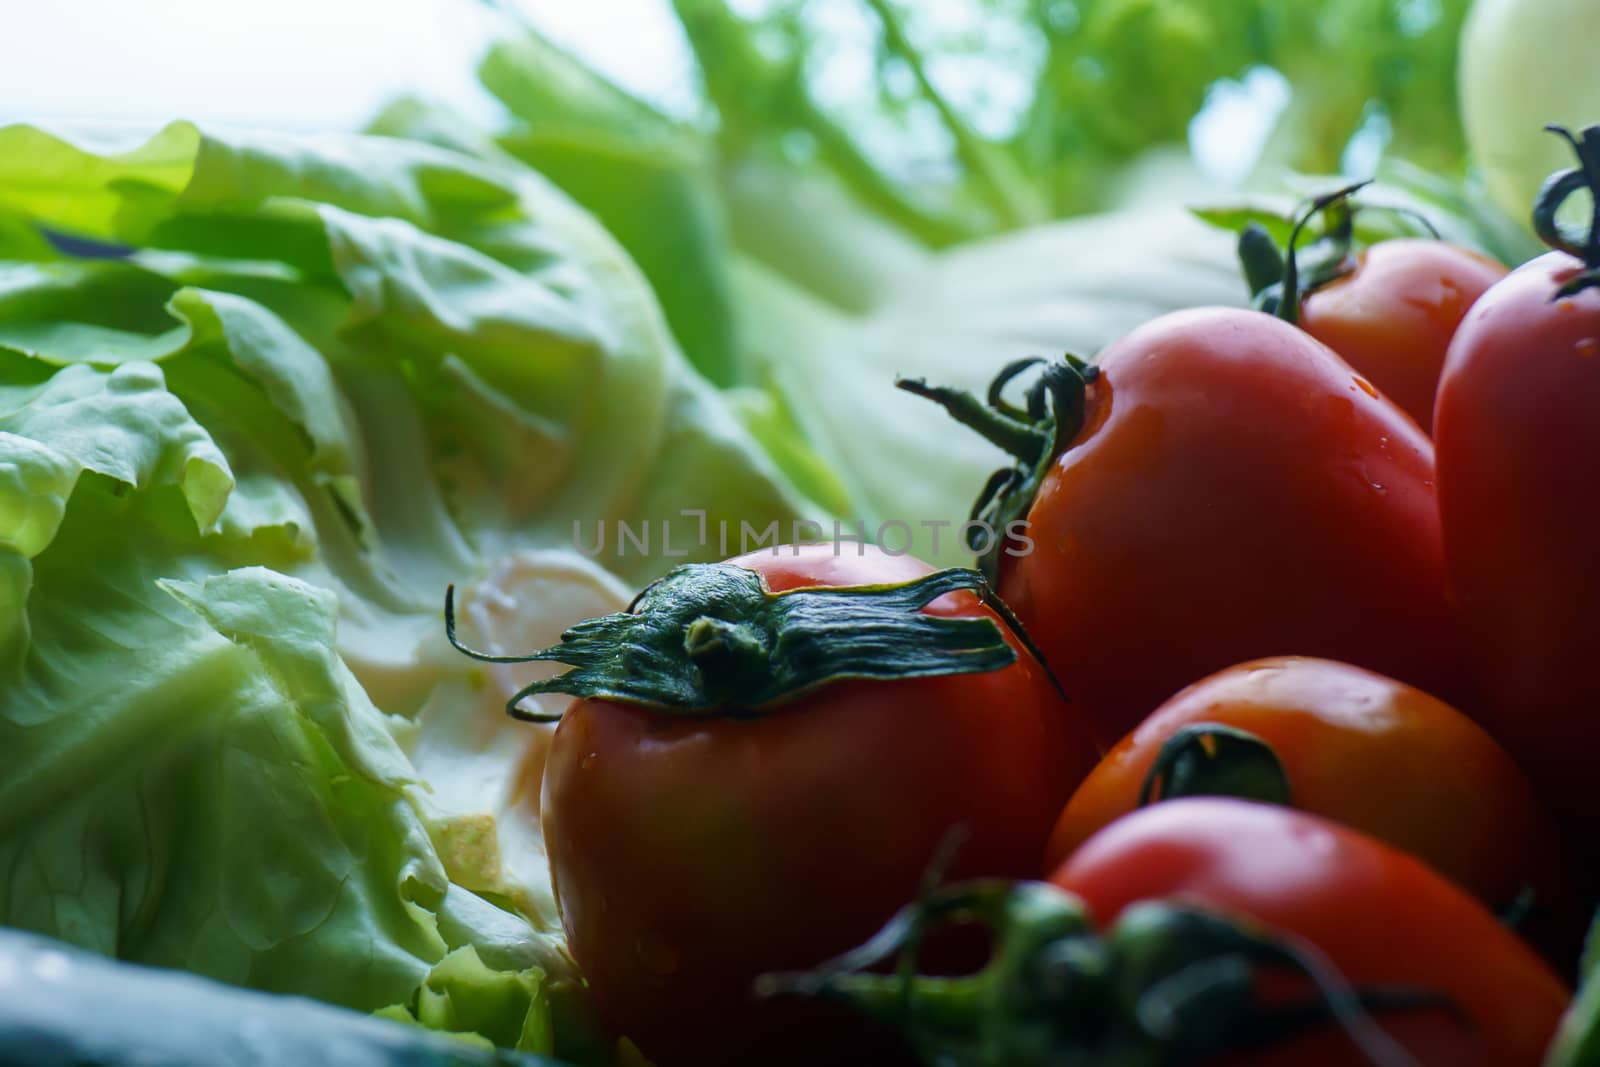 Healthy nutrition with fresh raw vegetables: close up detail of a tomato in the foreground on green vegetables in background bokeh effect by robbyfontanesi